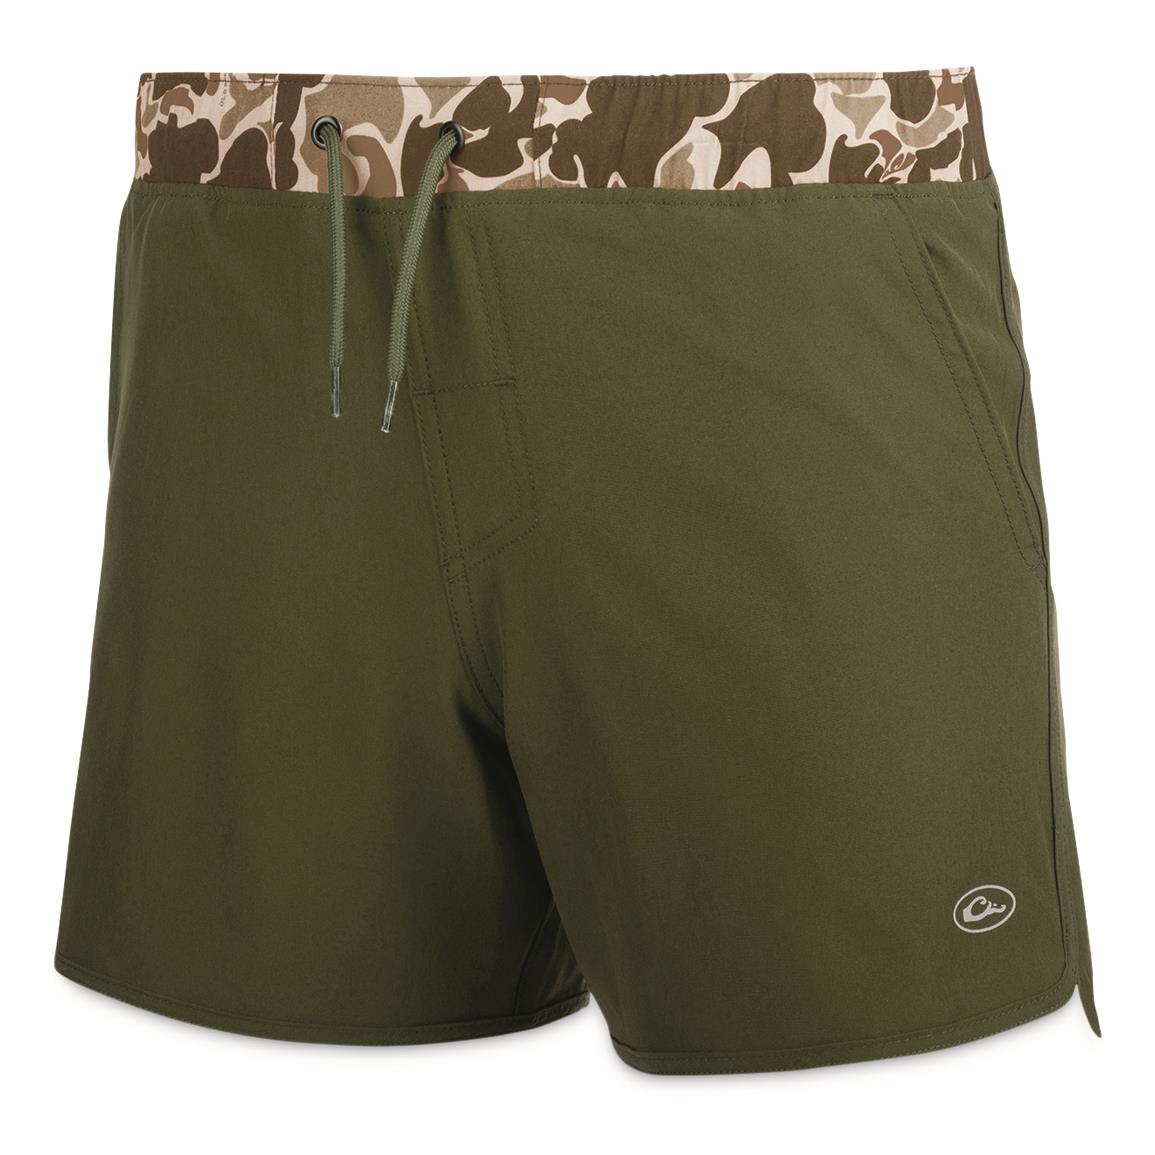 Drake Youth Commando Lined Volley Shorts, 5" inseam, Kolive/os Timber